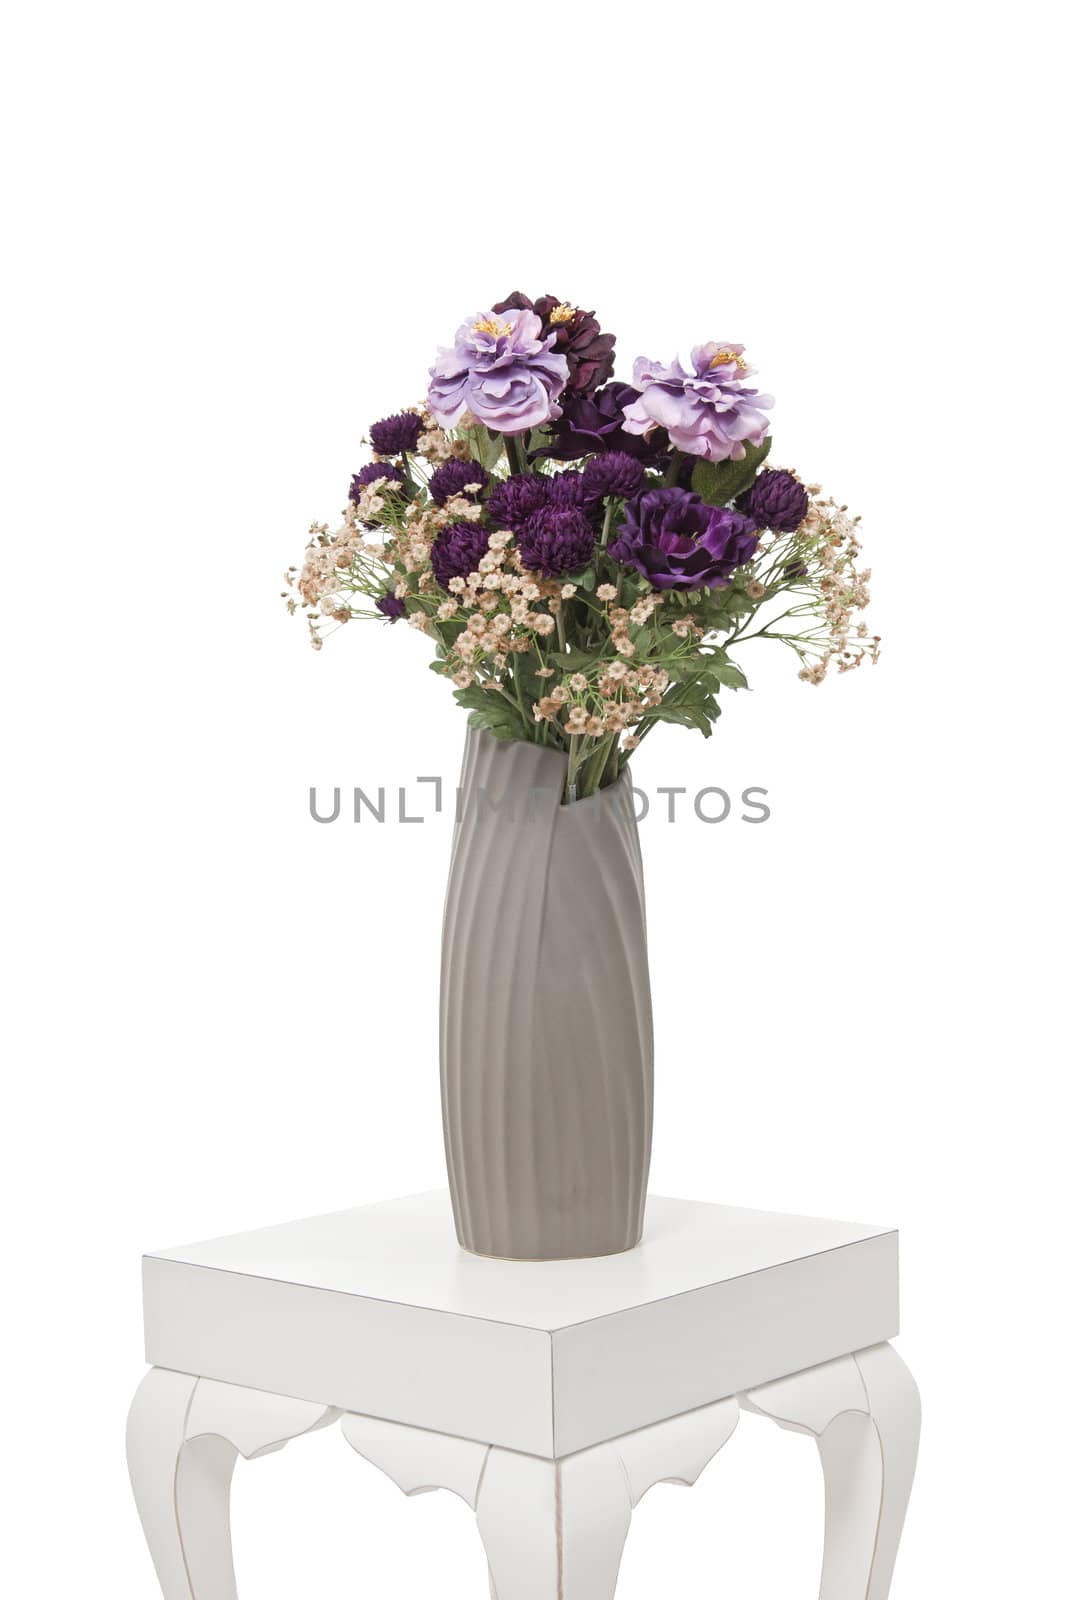 Purple flowers in vase on the table by pencap